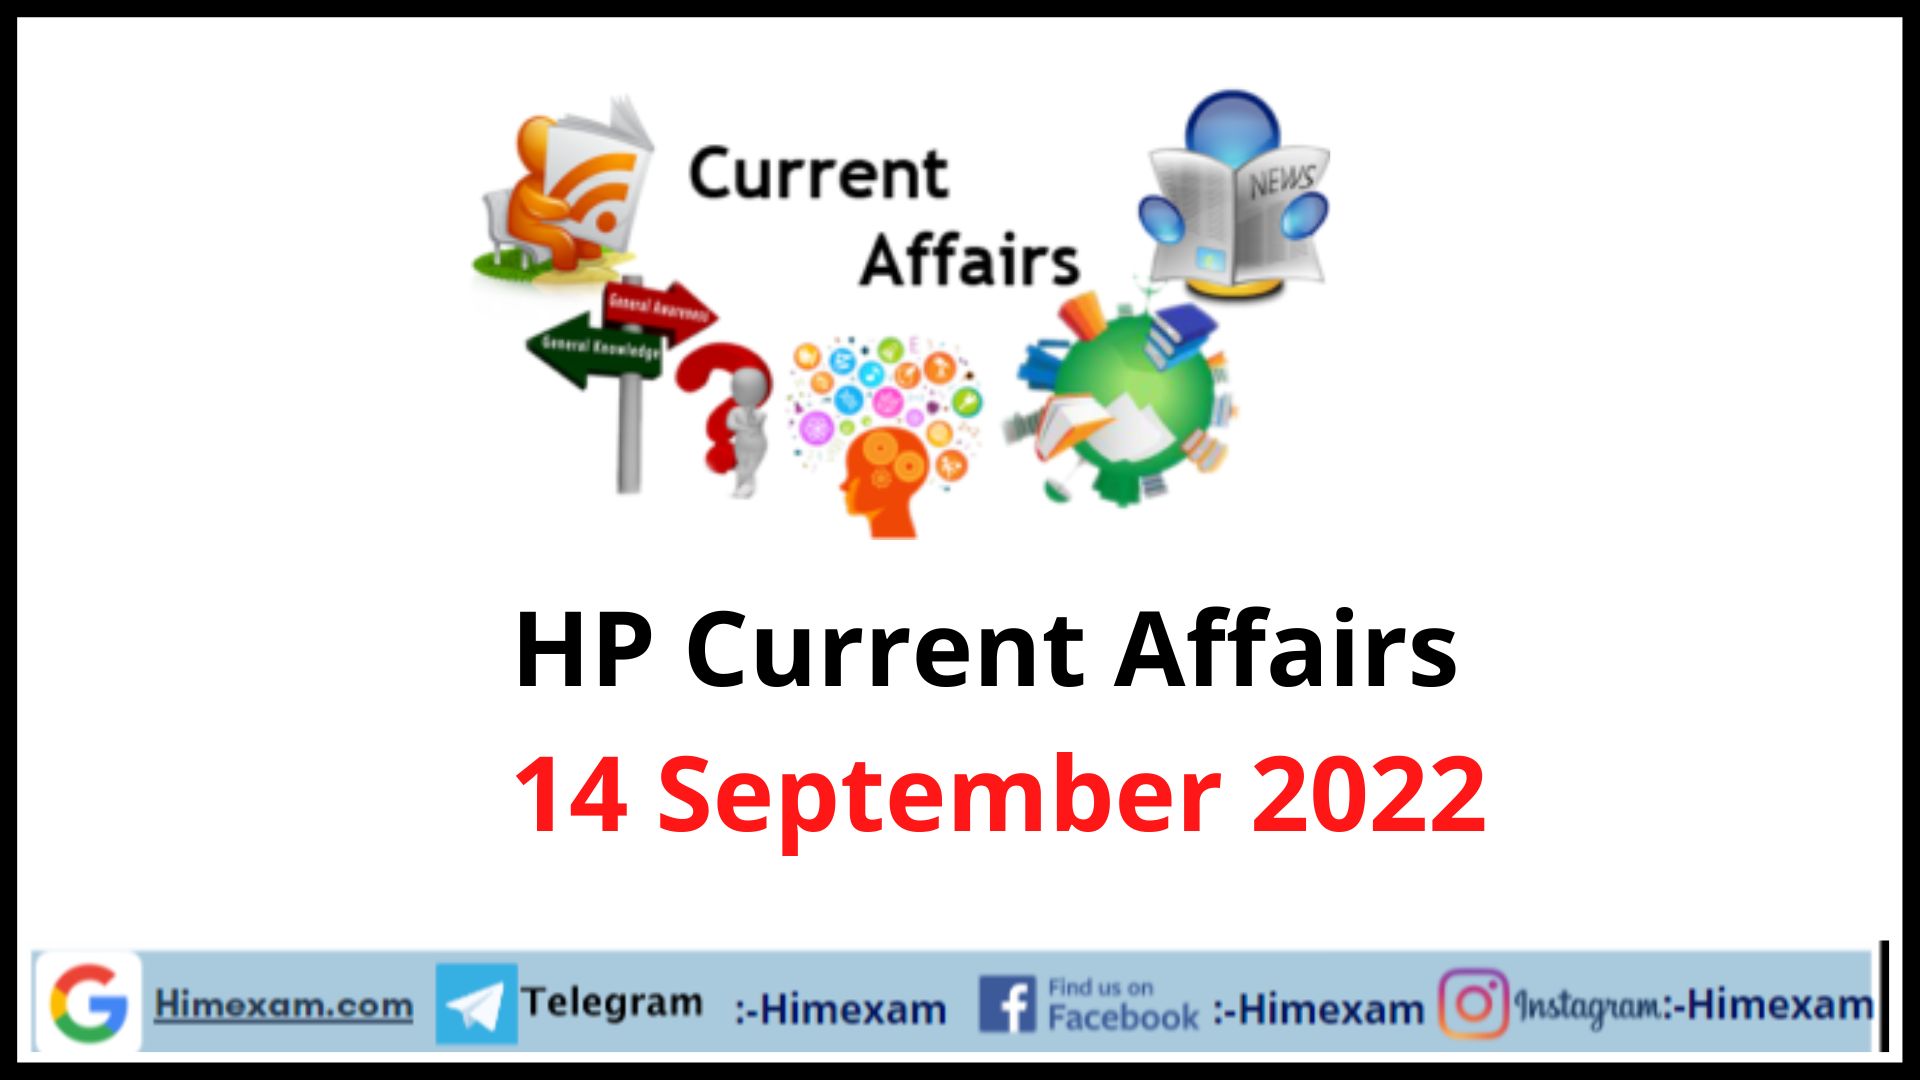 HP Current Affairs 14 September 2022